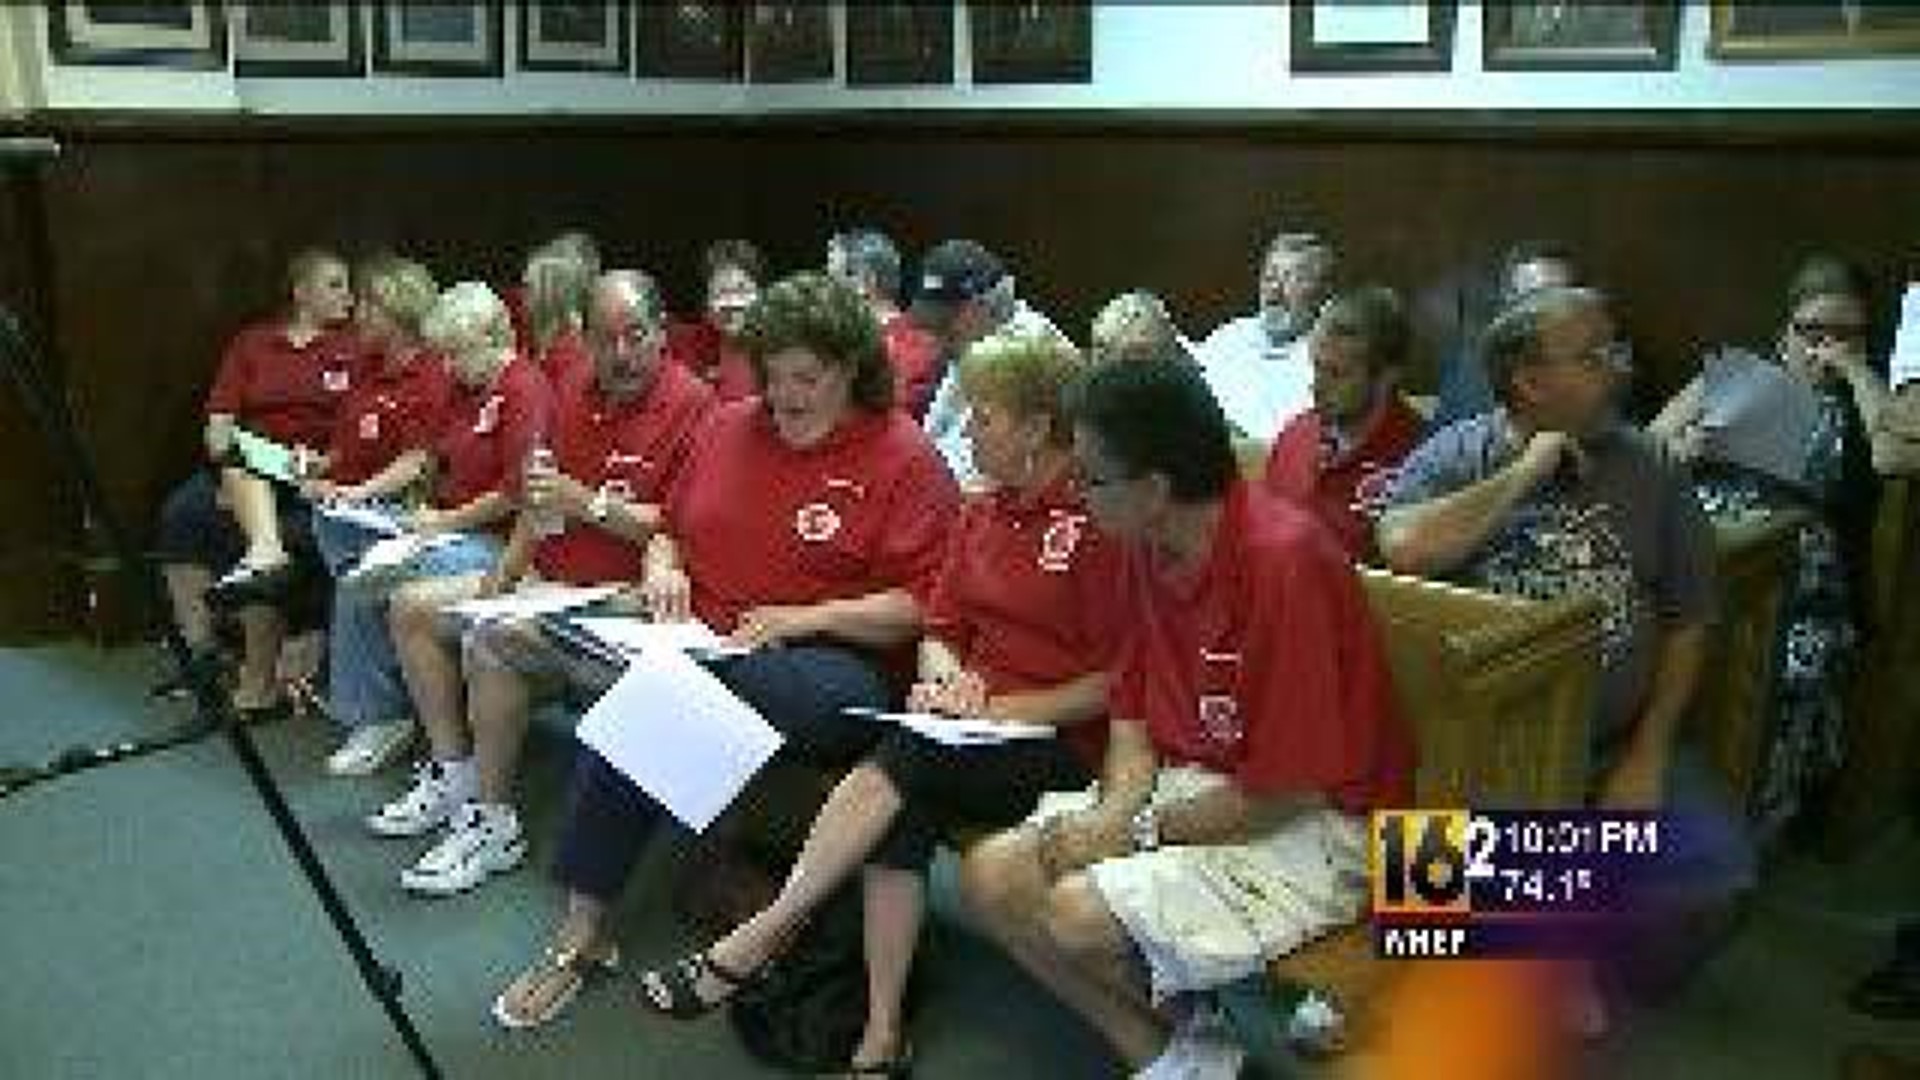 Anger Erupts at Hazleton Council Meeting Over Fees